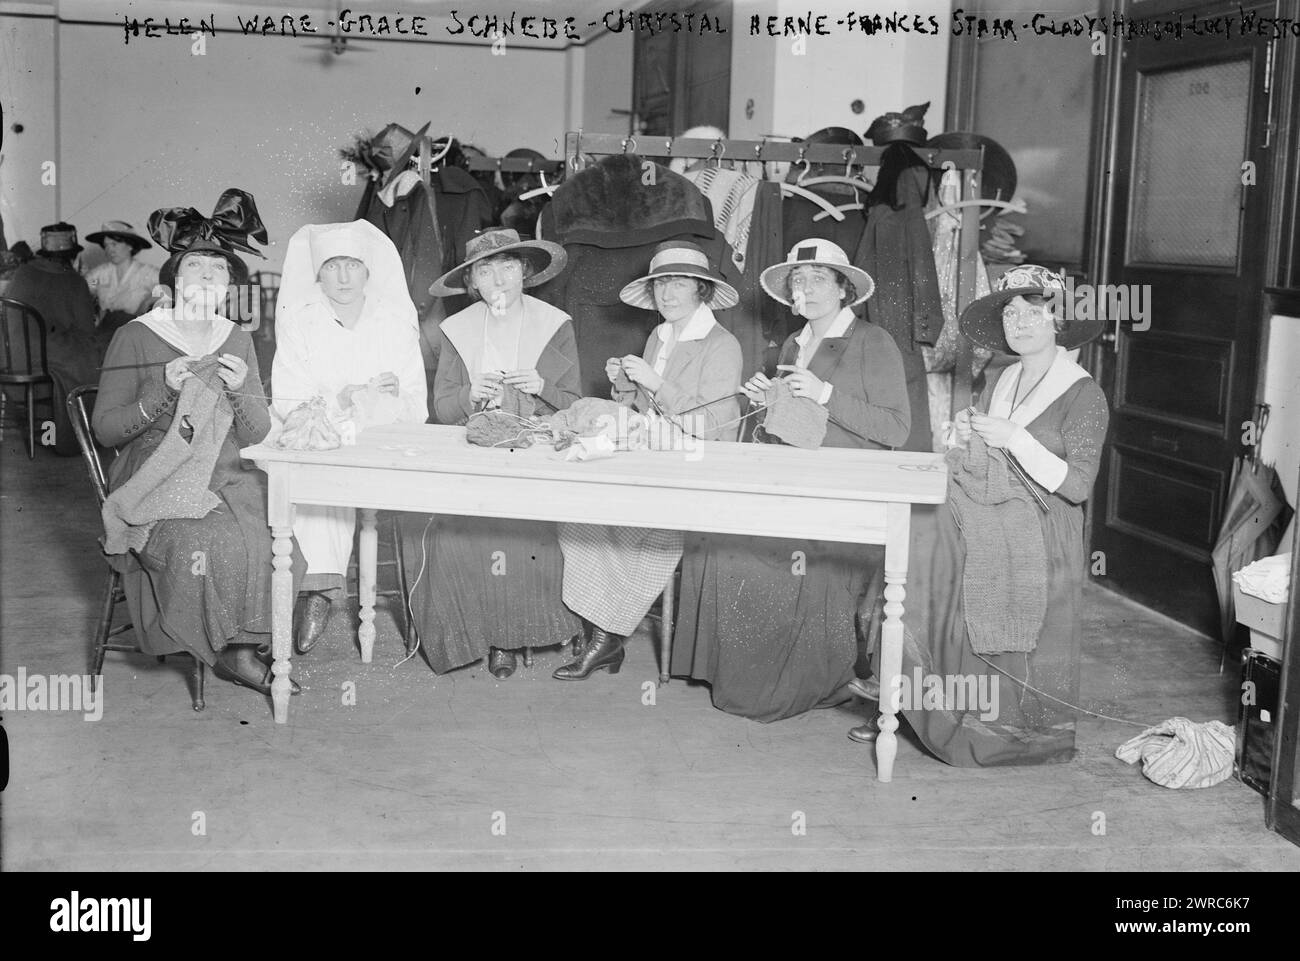 Helen Ware, Grace Schnebe i.e. Schnebbe, Chrystal Herne, Frances Starr, Gladys Hanson, Lucy Weston, Photograph shows actresses Helen (Remer) Ware (1877-1939), Grace Schnebbe (Mrs. Howard Schnebbe), Lucy Weston and others knitting for soldiers during World War I as part of the Stage Women's War Relief project in New York City., 1917 May, Glass negatives, 1 negative: glass Stock Photo